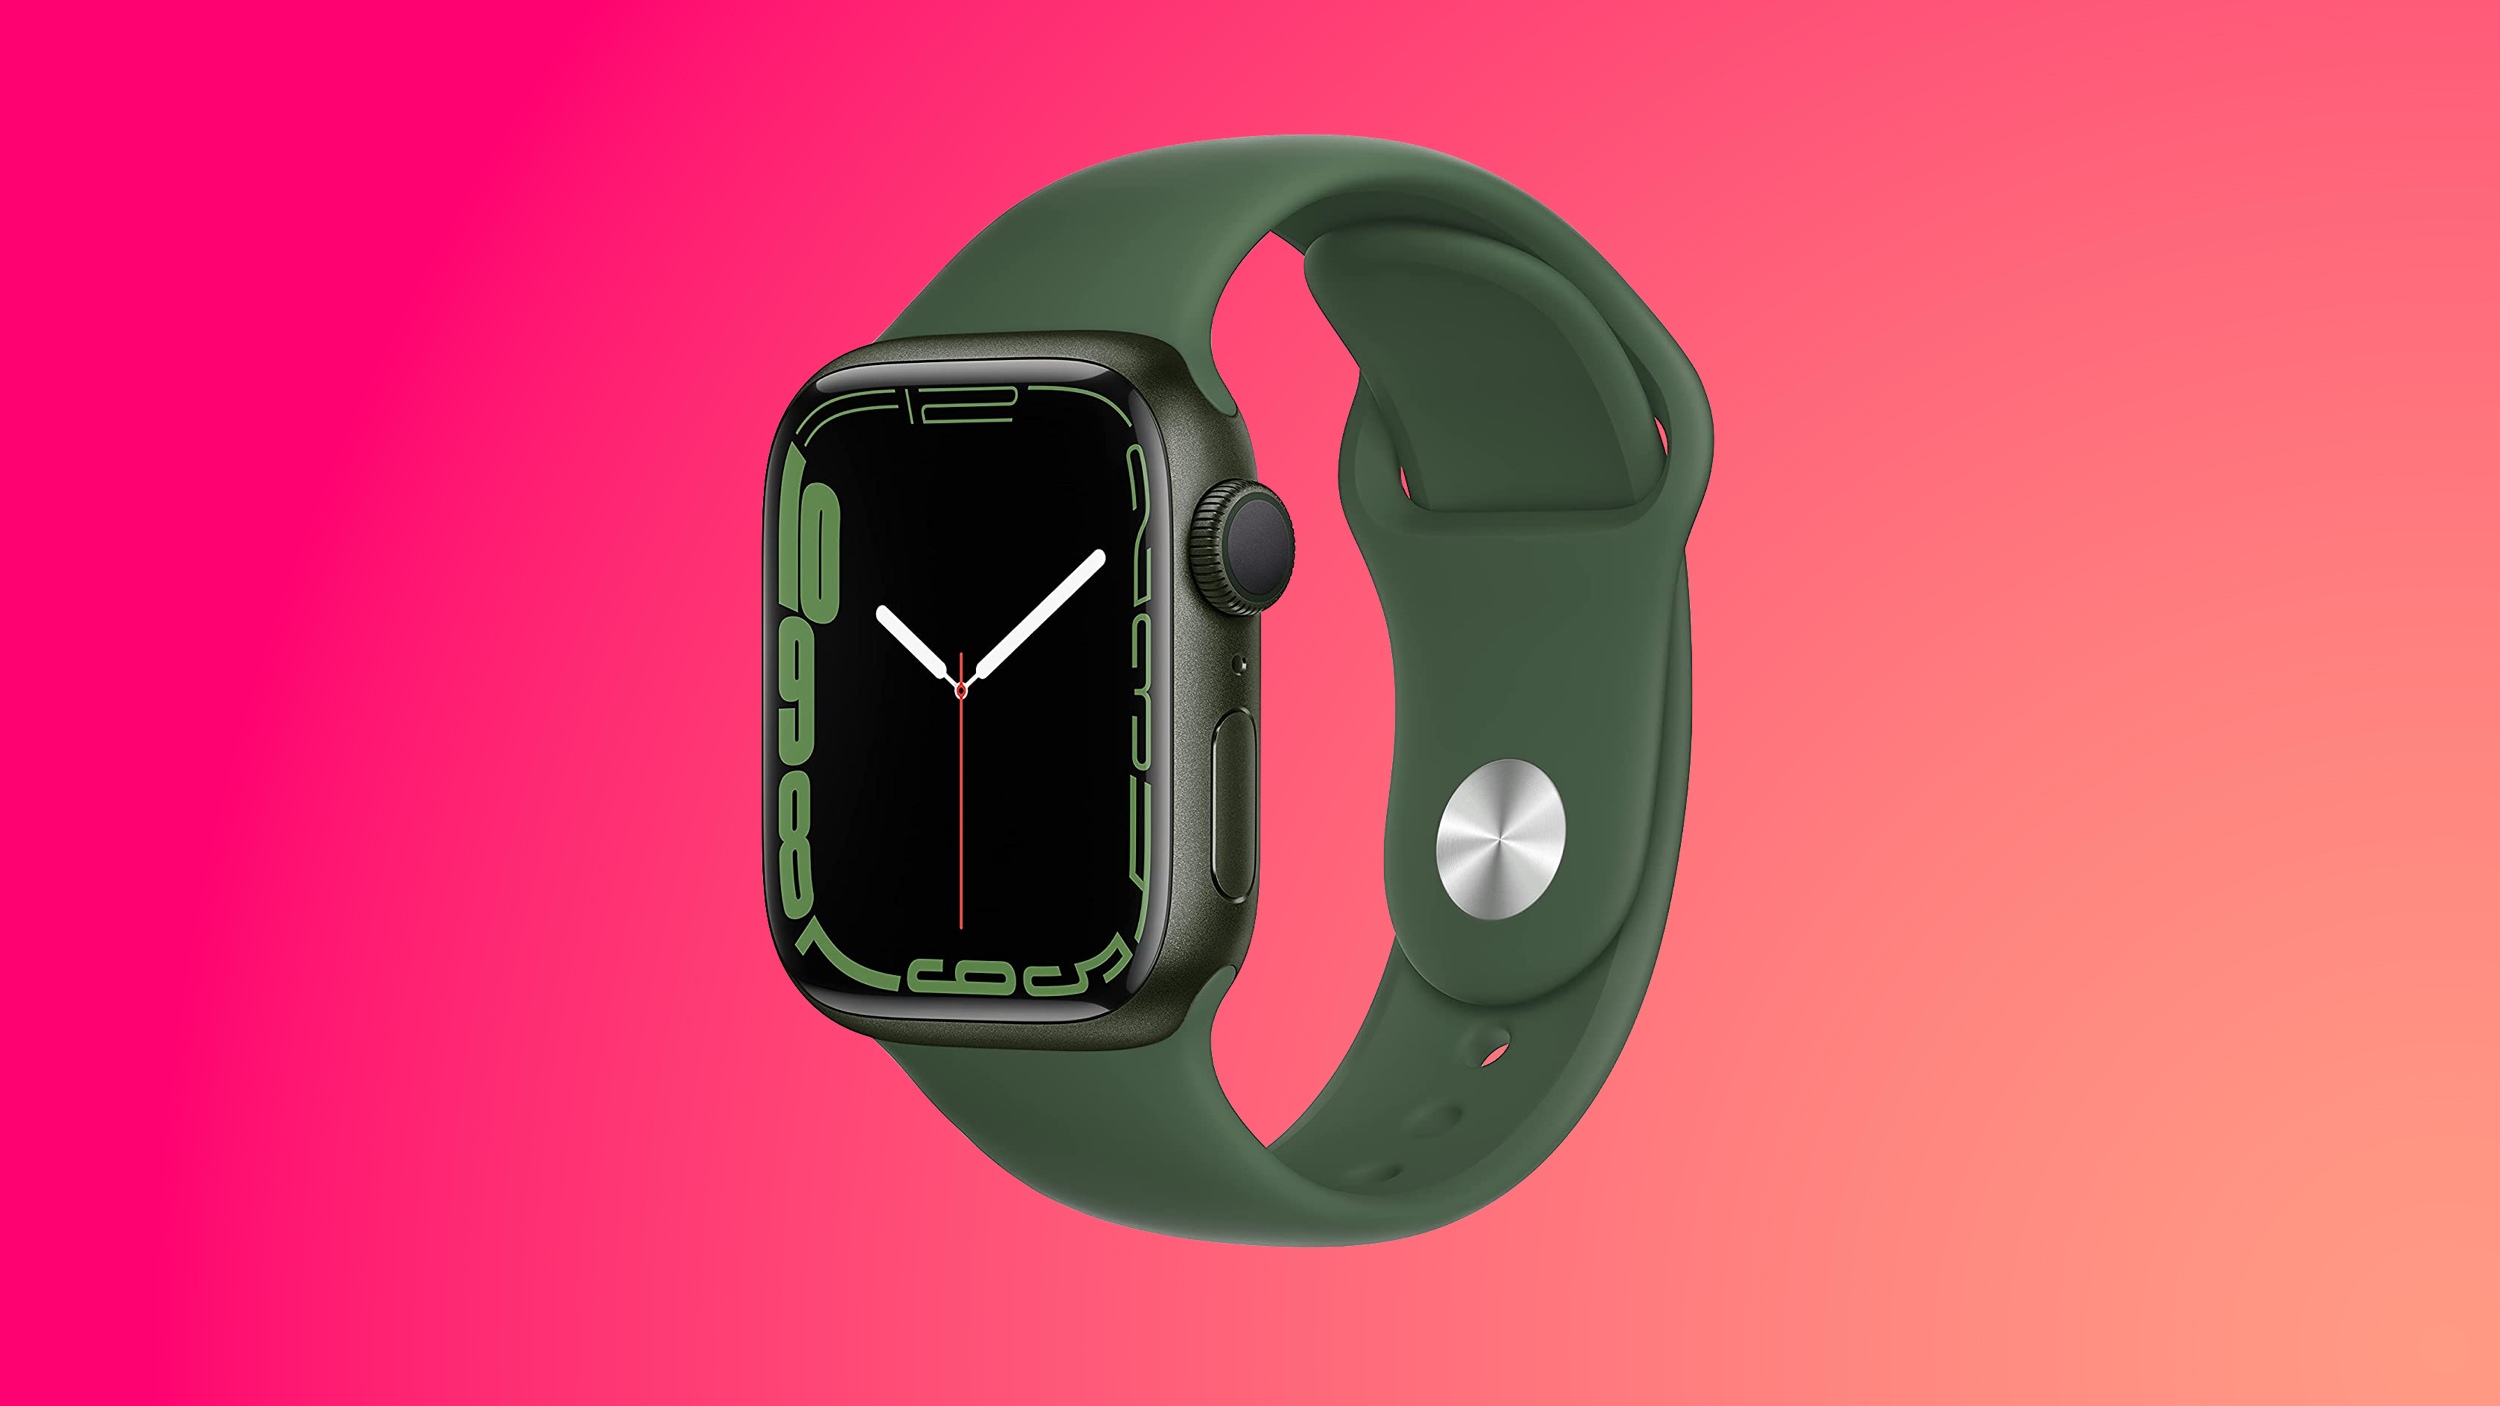 Deals: Apple Watch Series 7 Drops to Lowest Price Ever at $300 ($99 Off)